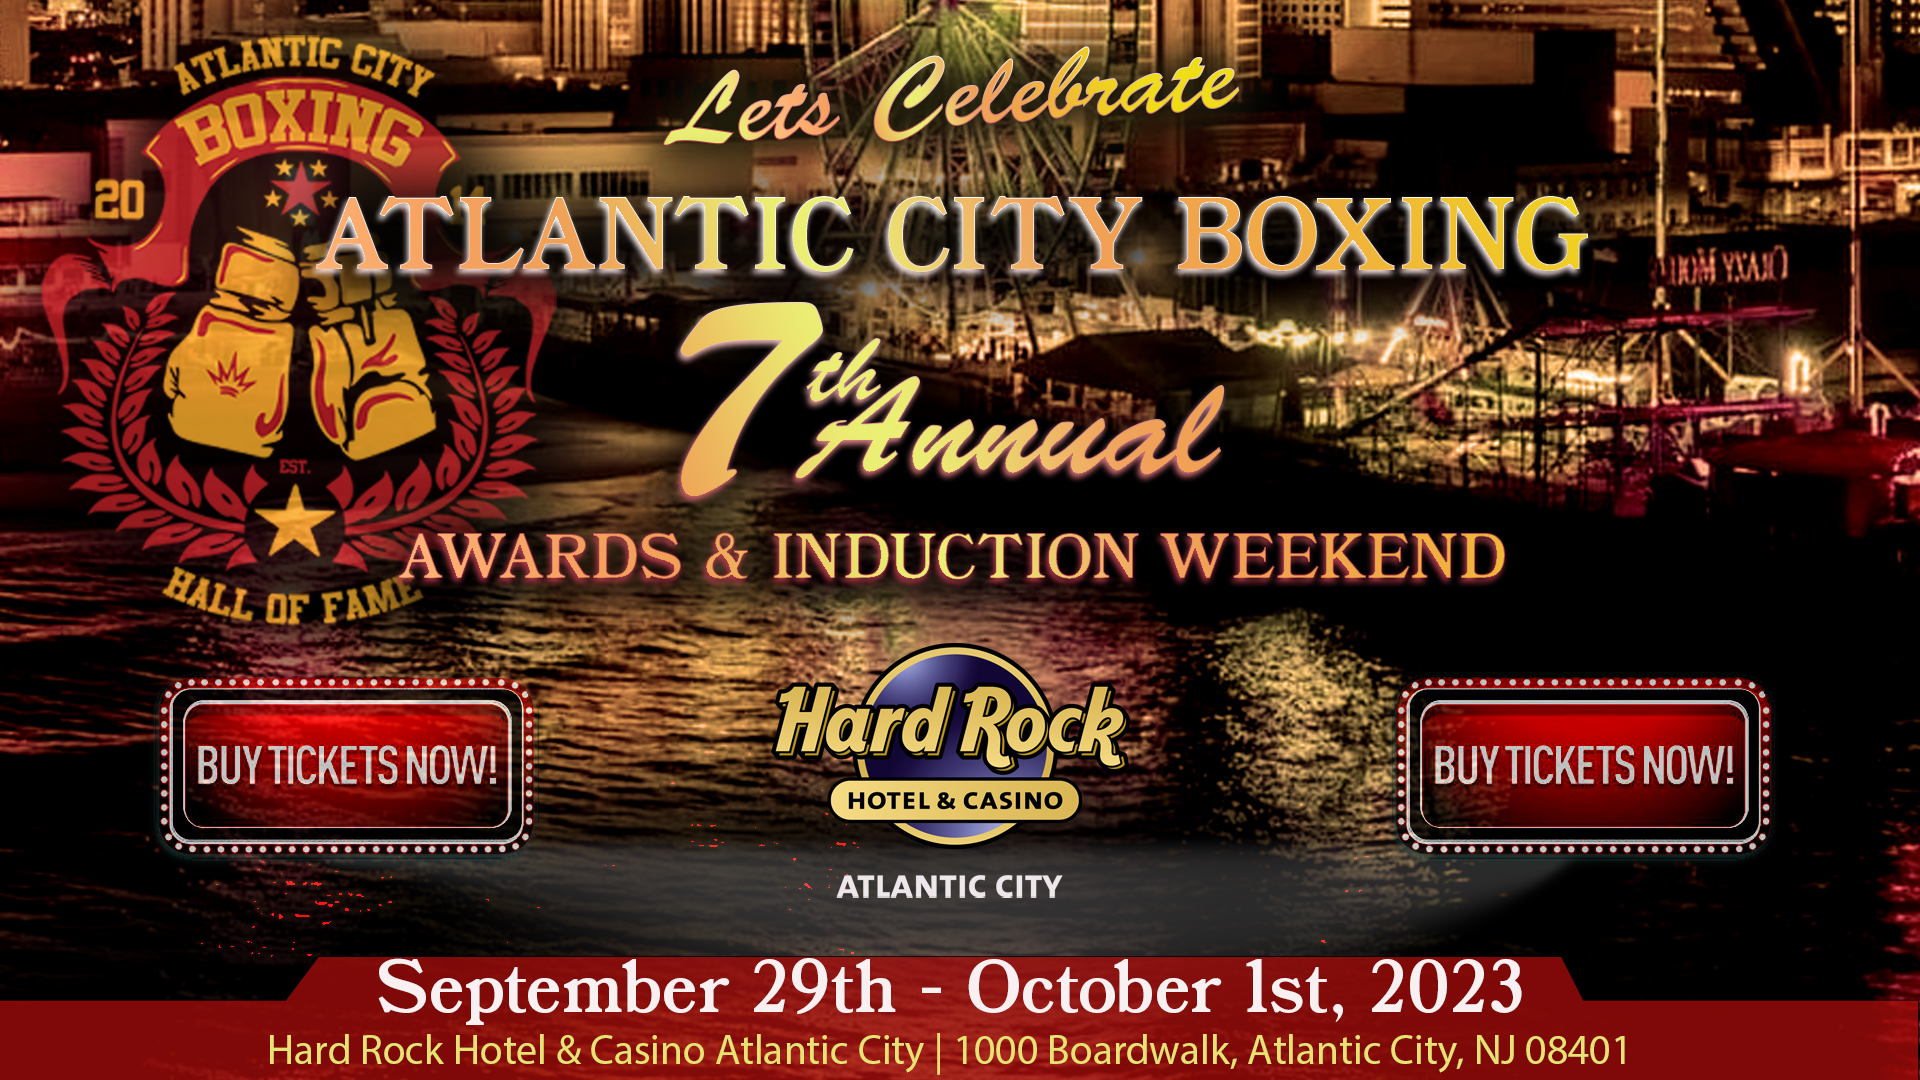 George Foreman headlines the Atlantic City Boxing Hall of Fame 2023 class